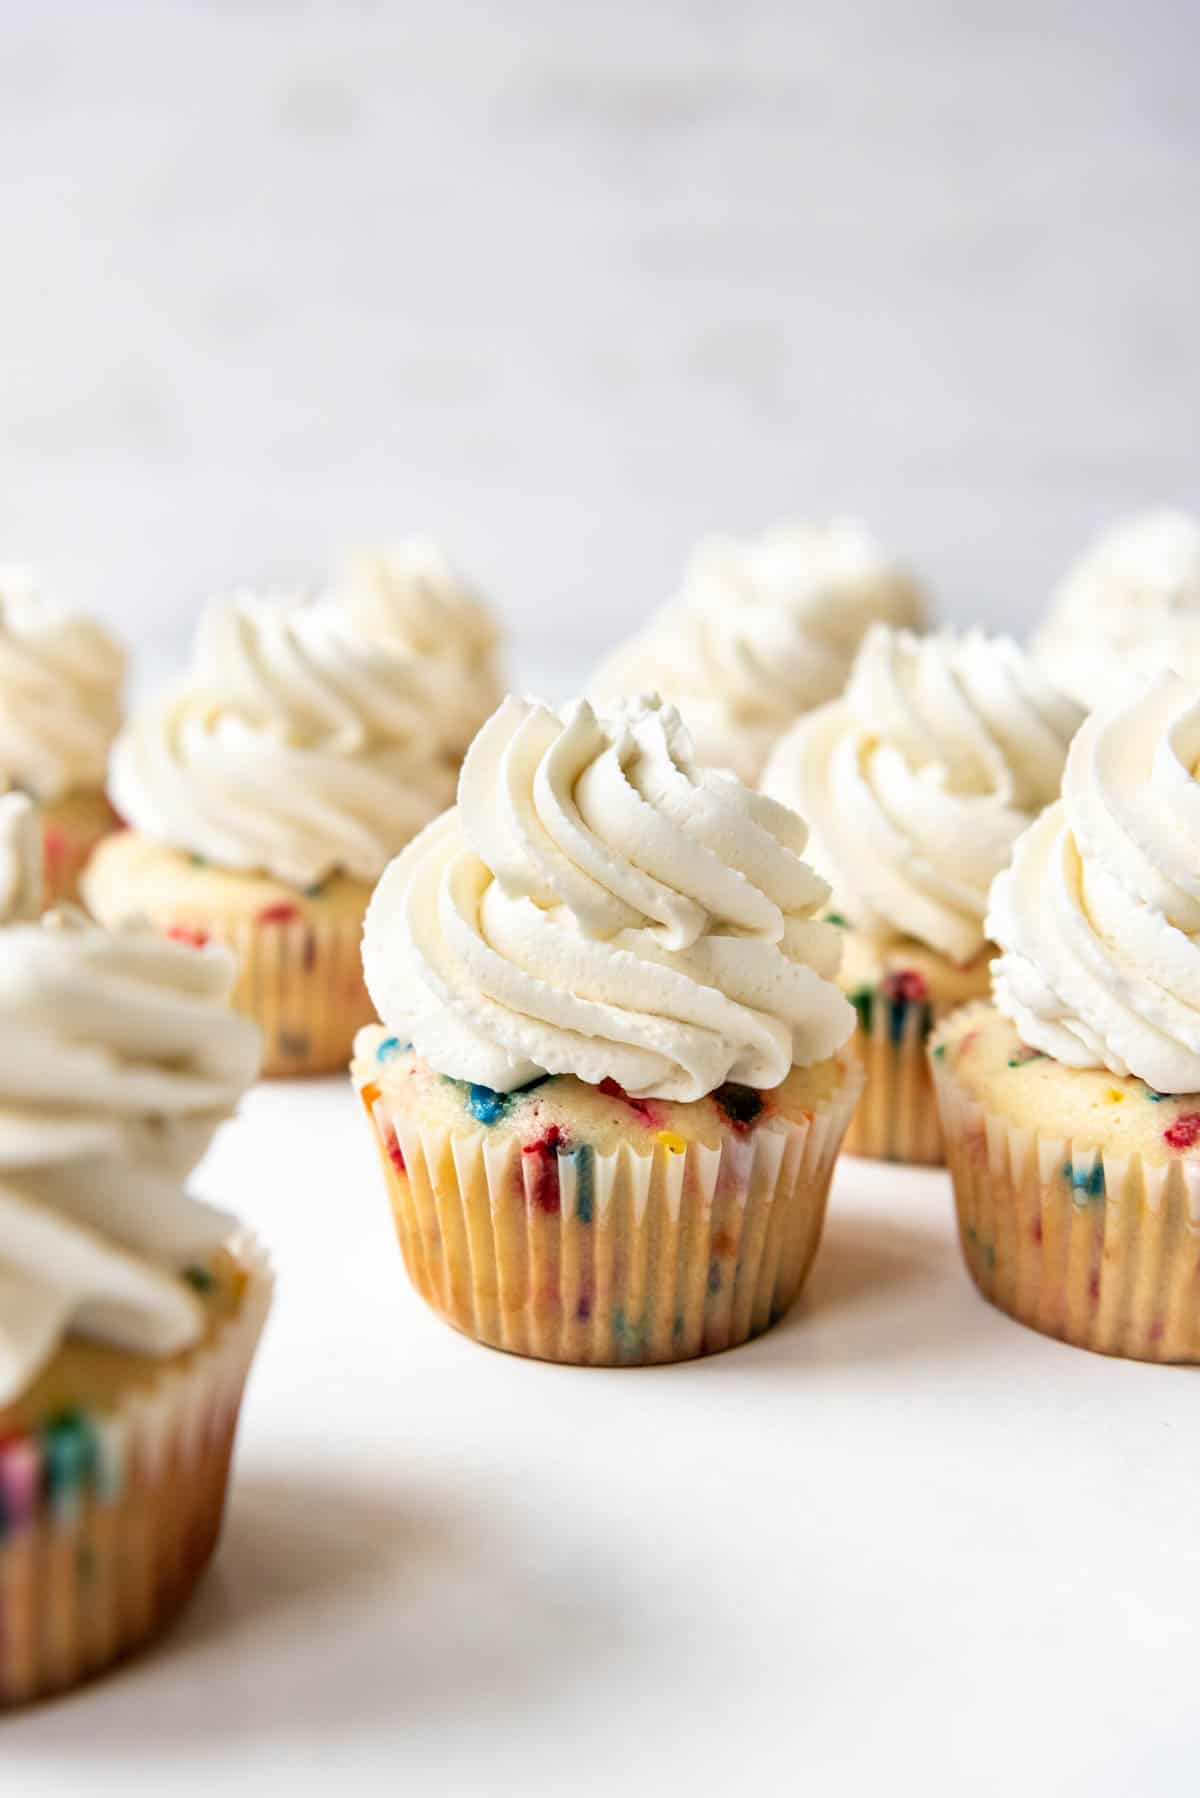 Homemade cupcakes decorated with Swiss meringue buttercream.